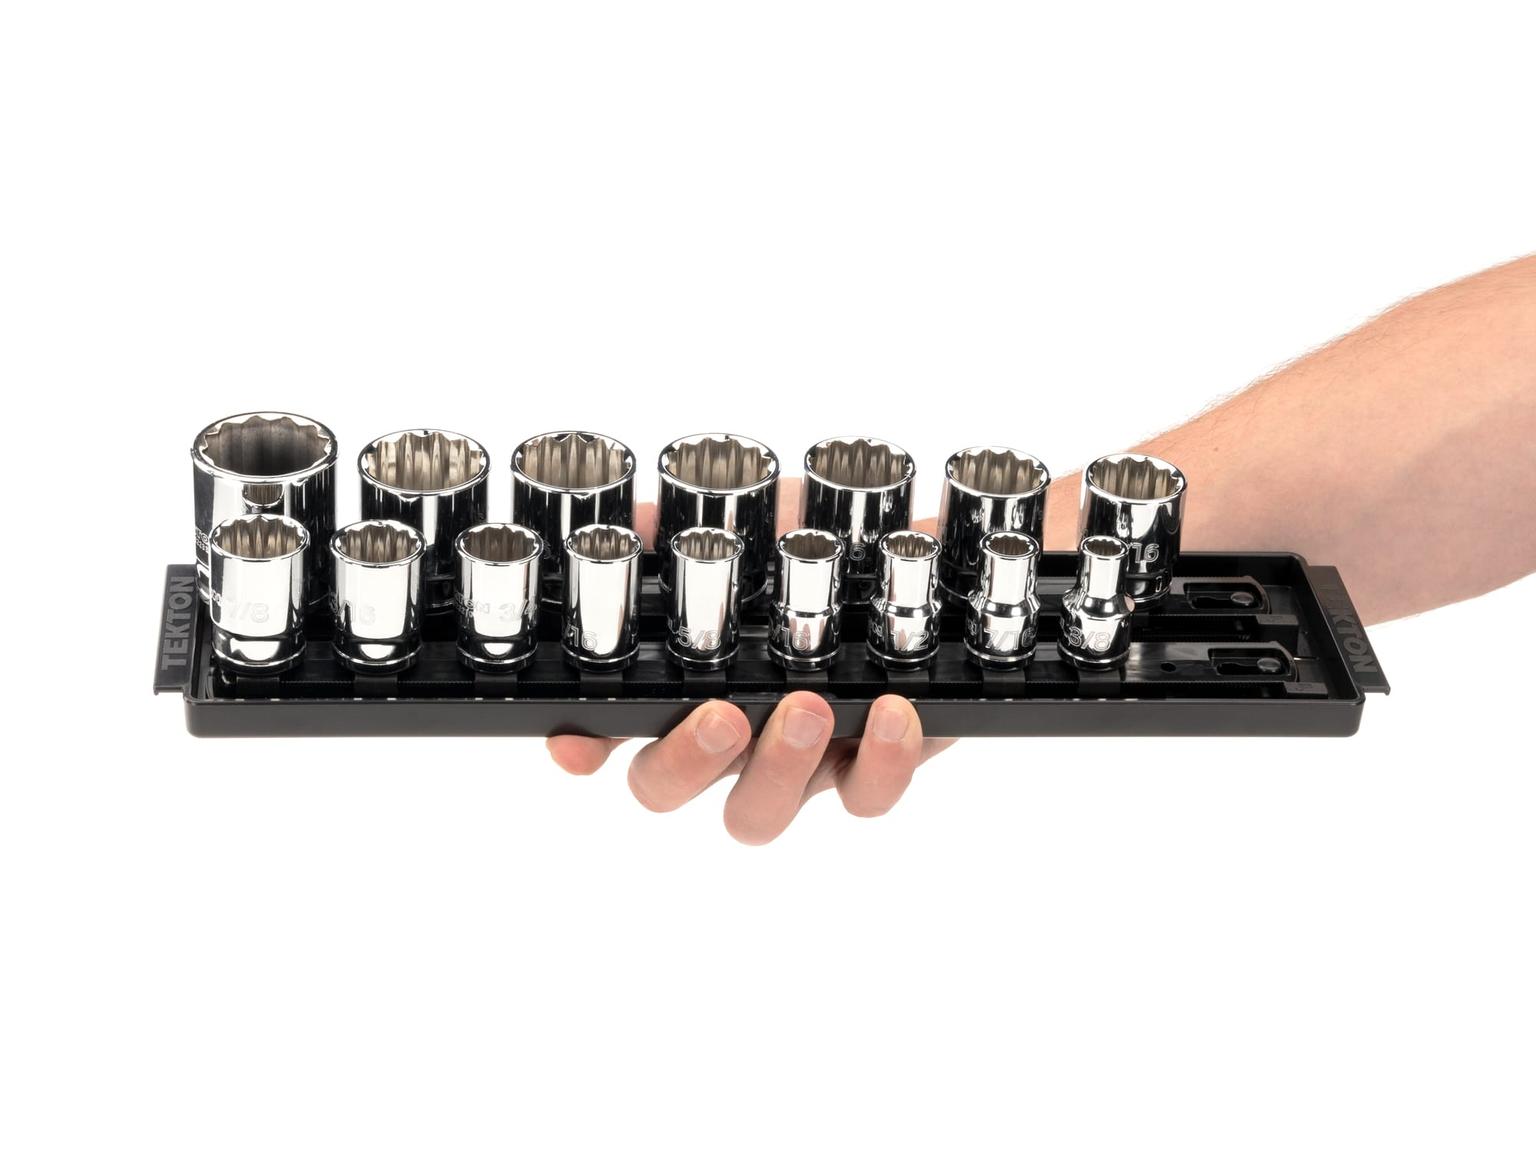 TEKTON SHD92118-T 1/2 Inch Drive 12-Point Socket Set with Rails, 16-Piece (3/8-1-5/16 in.)